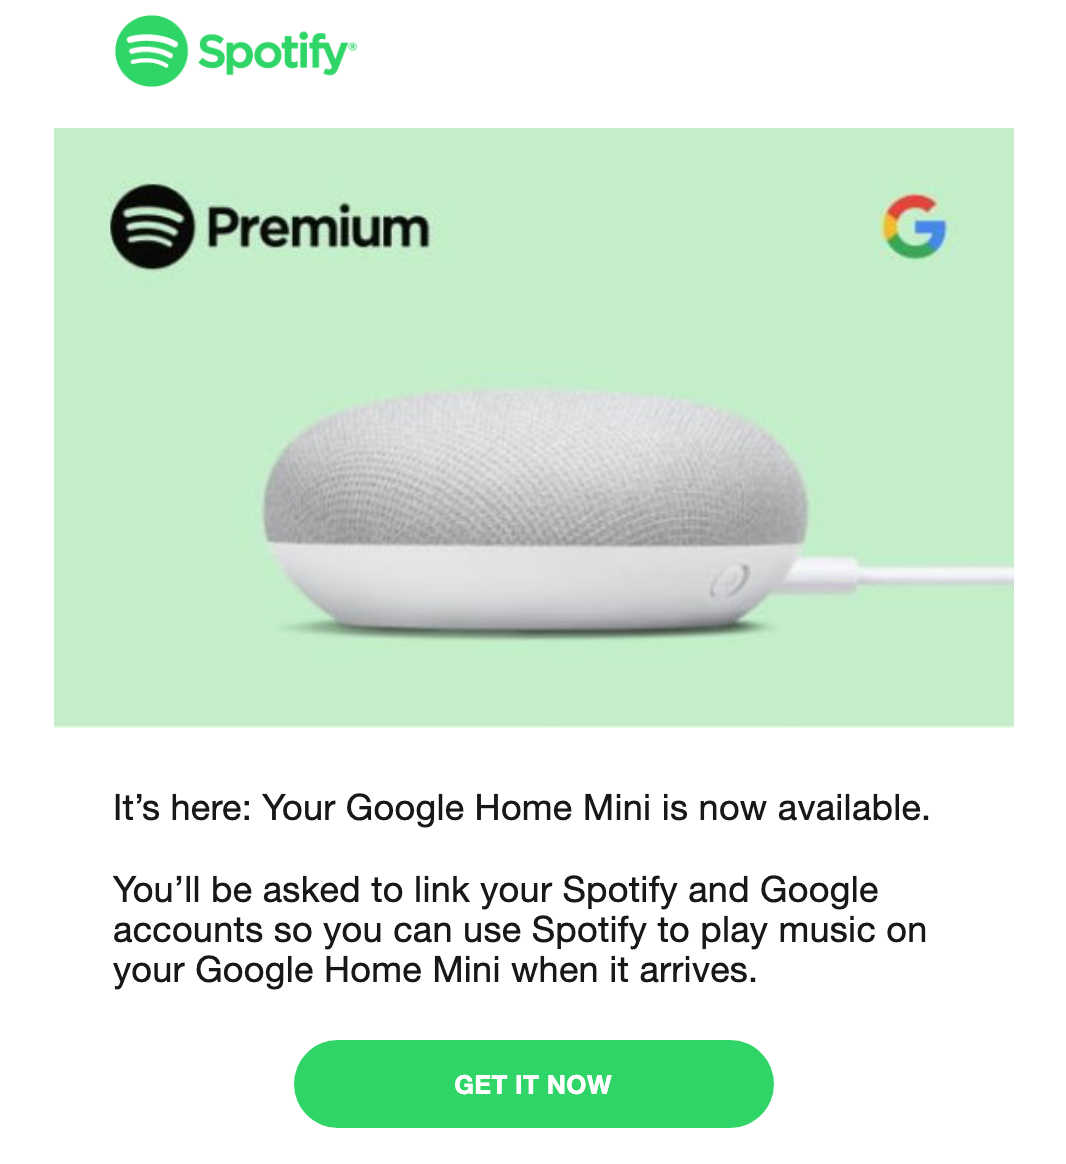 Free Google Home Mini - Just connect your Spotify account to Google.